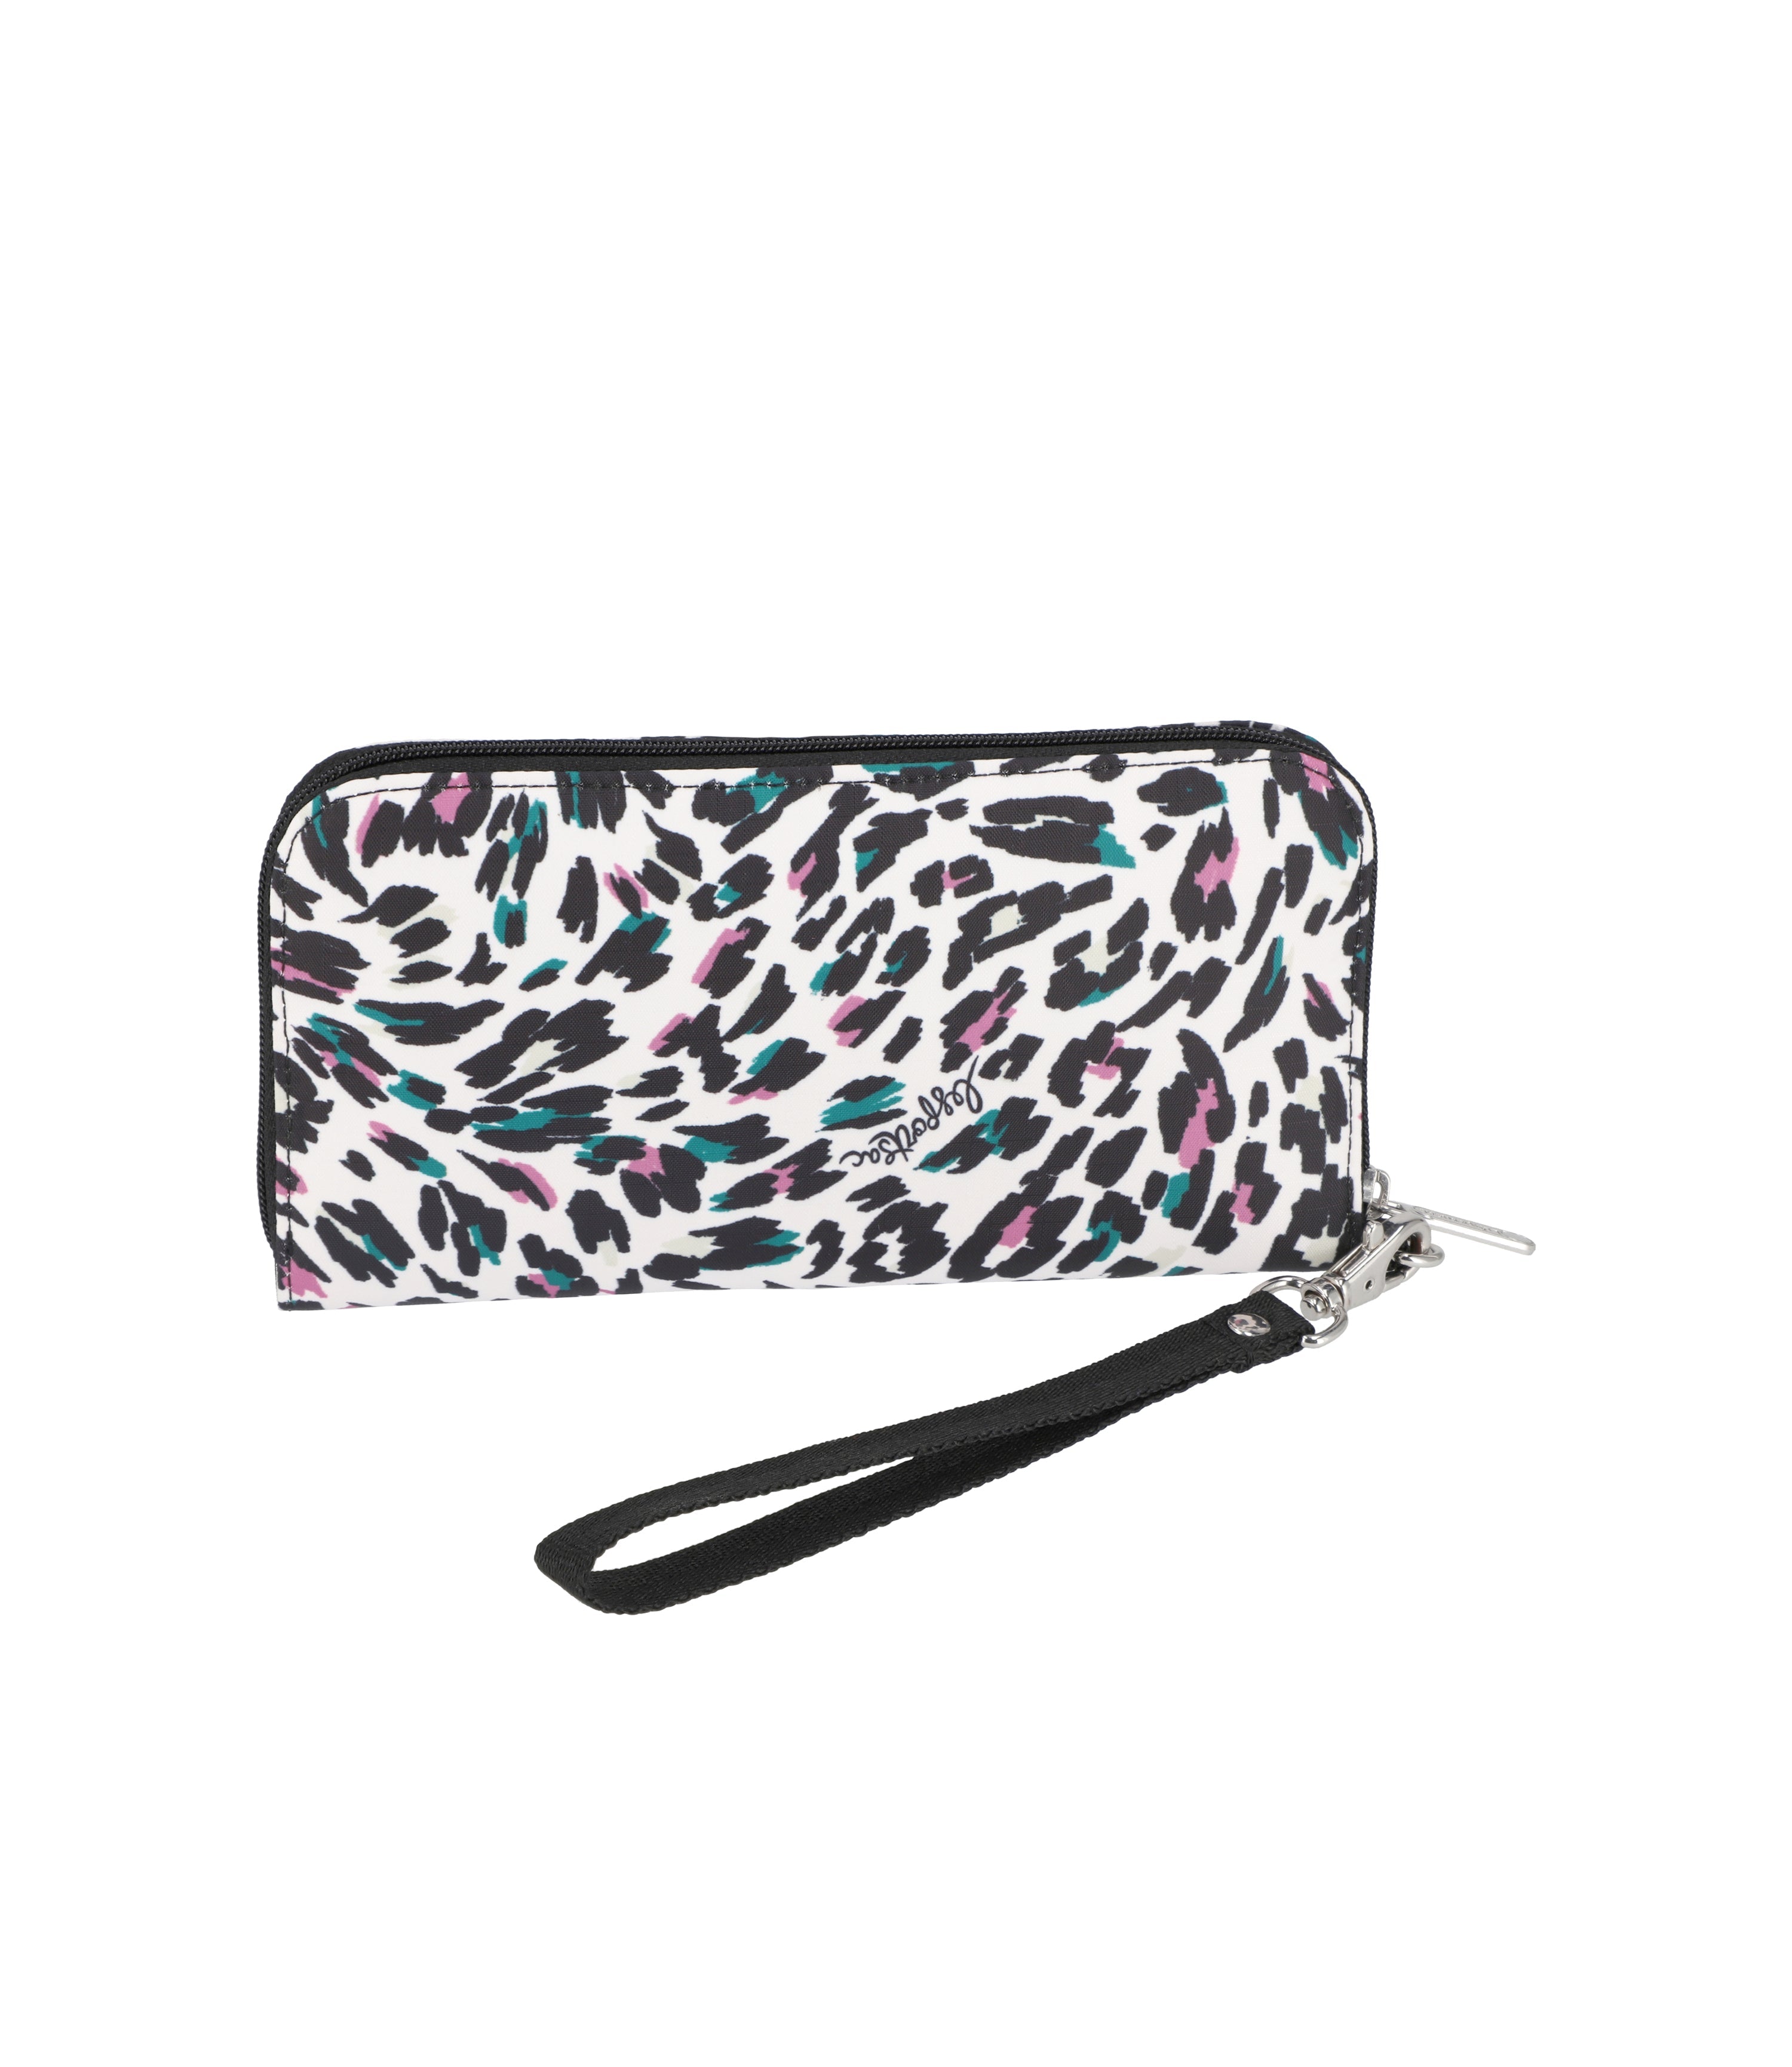 Juicy Couture Animal Print Bags & Handbags for Women for sale | eBay